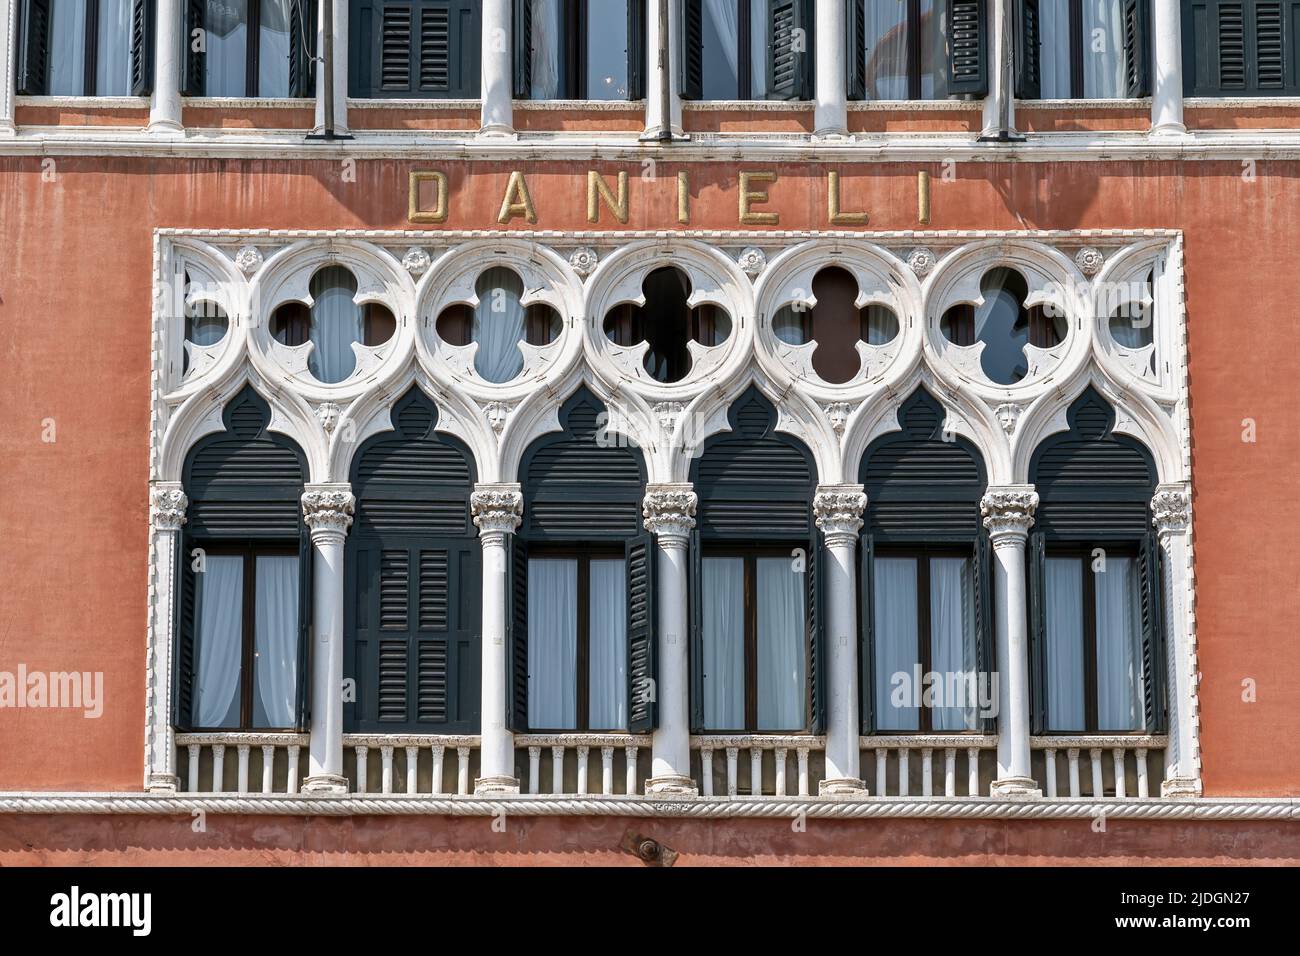 Hotel Danieli, five-star luxury, world renowned. Venetian Gothic style facade. Venice, Italy, Europe, EU. Hotel sign name. Close up. Stock Photo